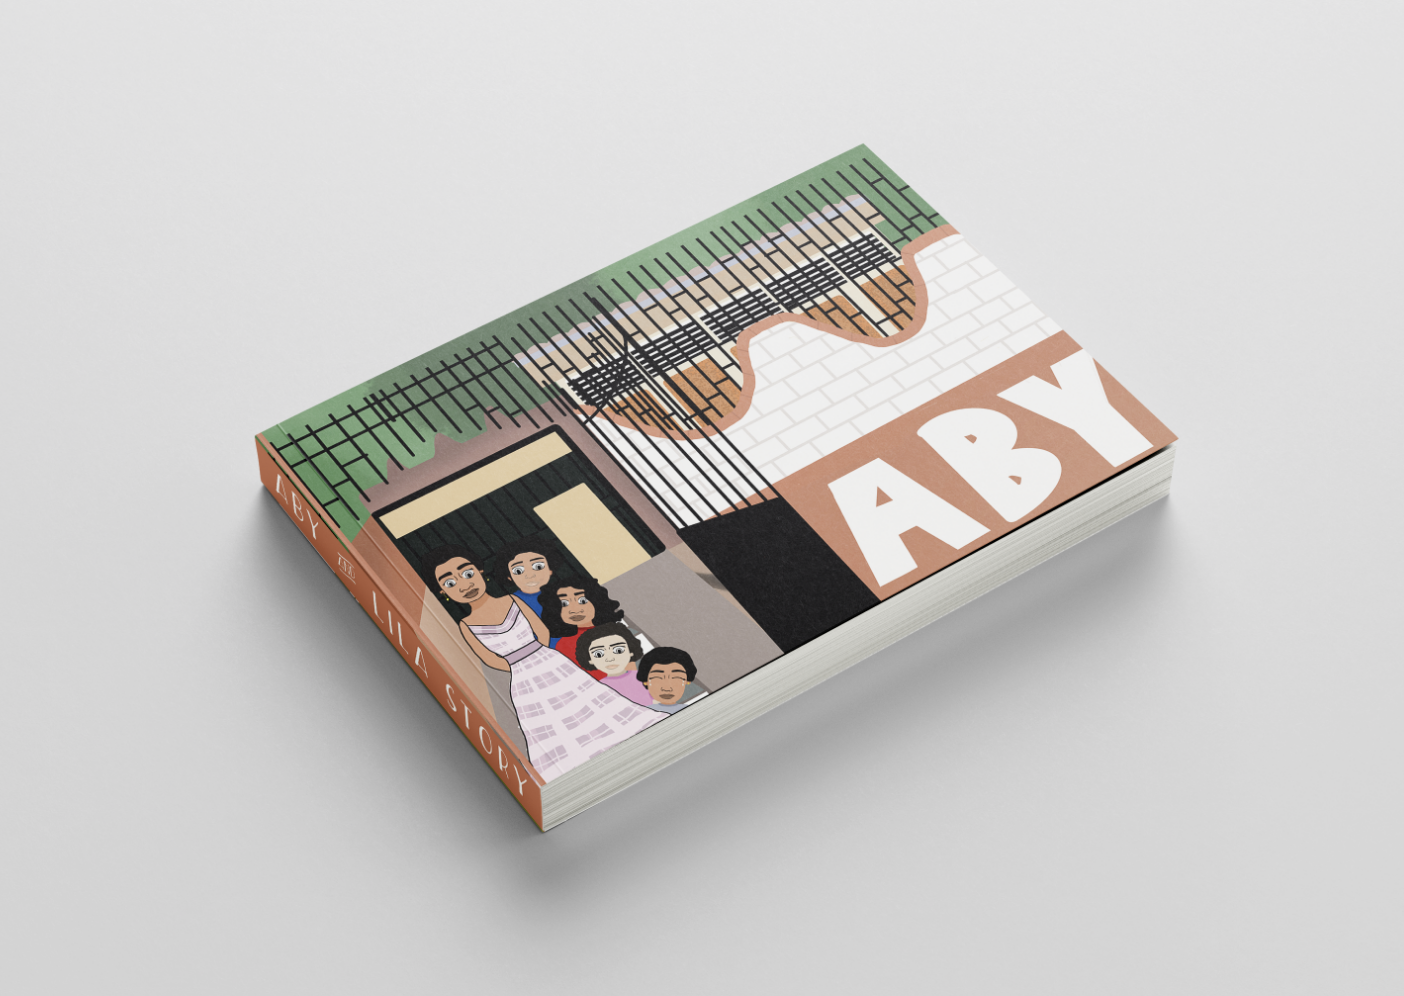 A colorful graphic novel lies against a white backdrop, its cover depicting a cartoon family in front of a house, titled 'ABY'.